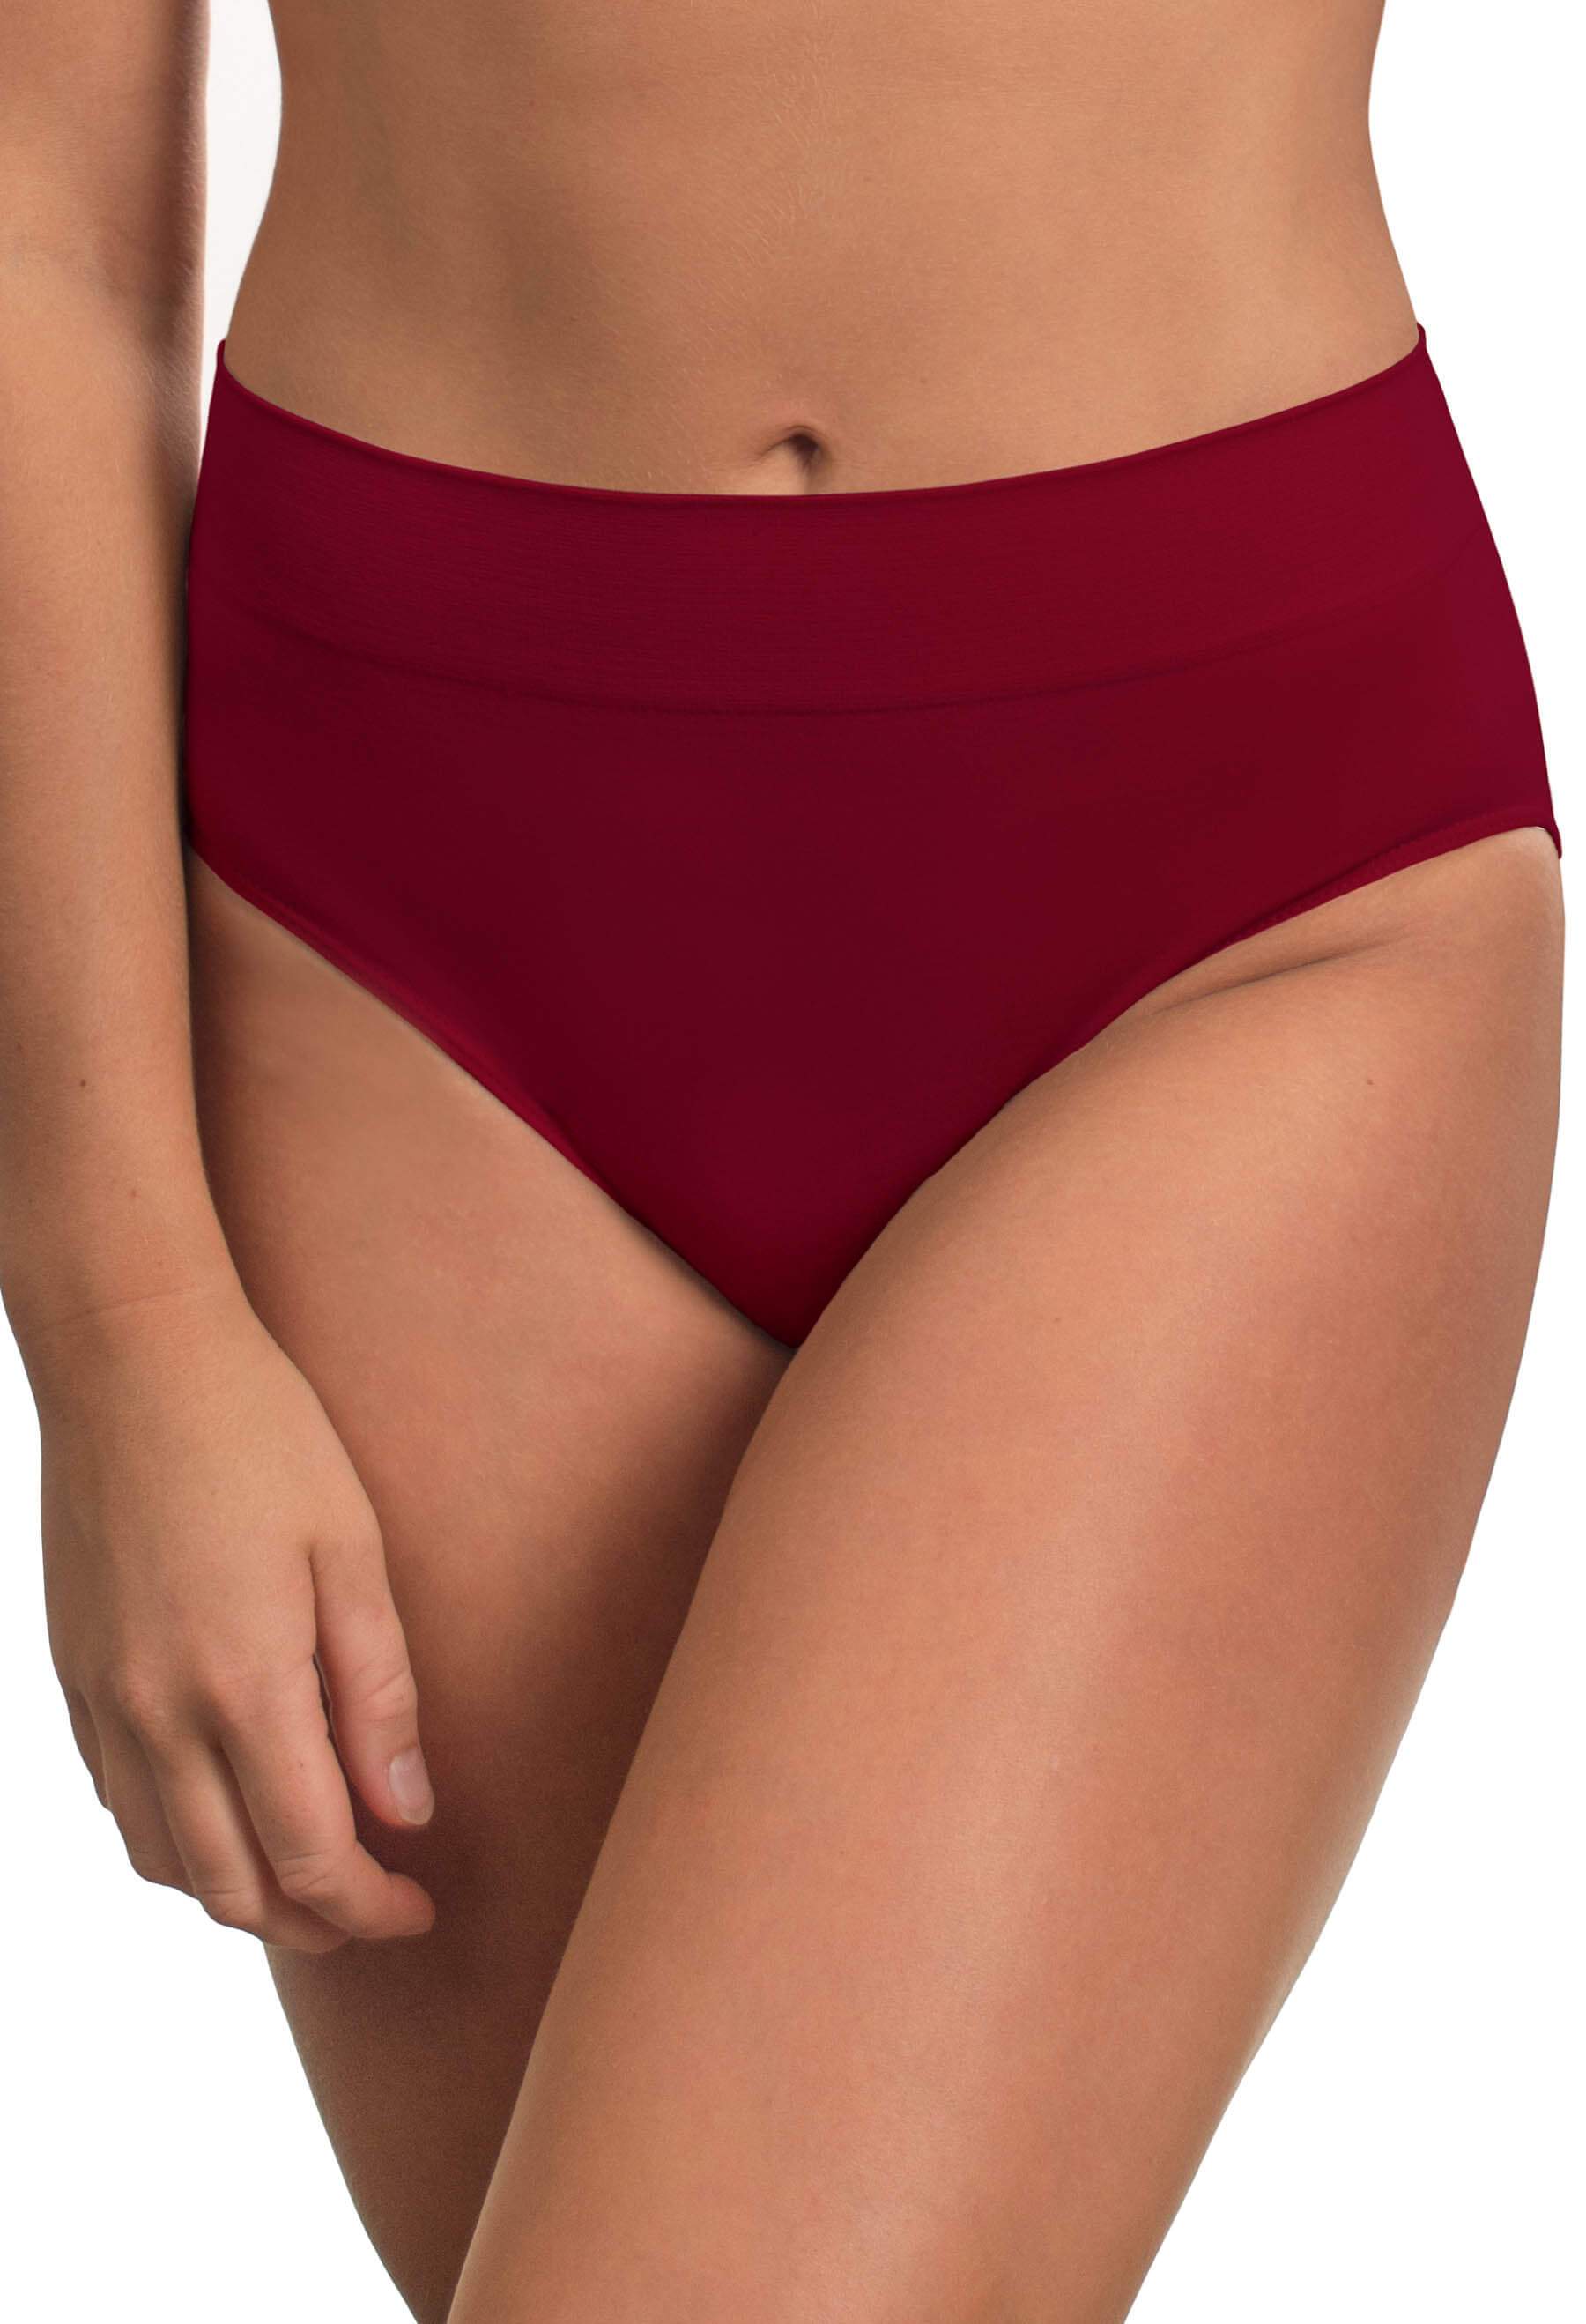 Travel Underwear • Seamless, No Tag Undies Perfect For Travelling